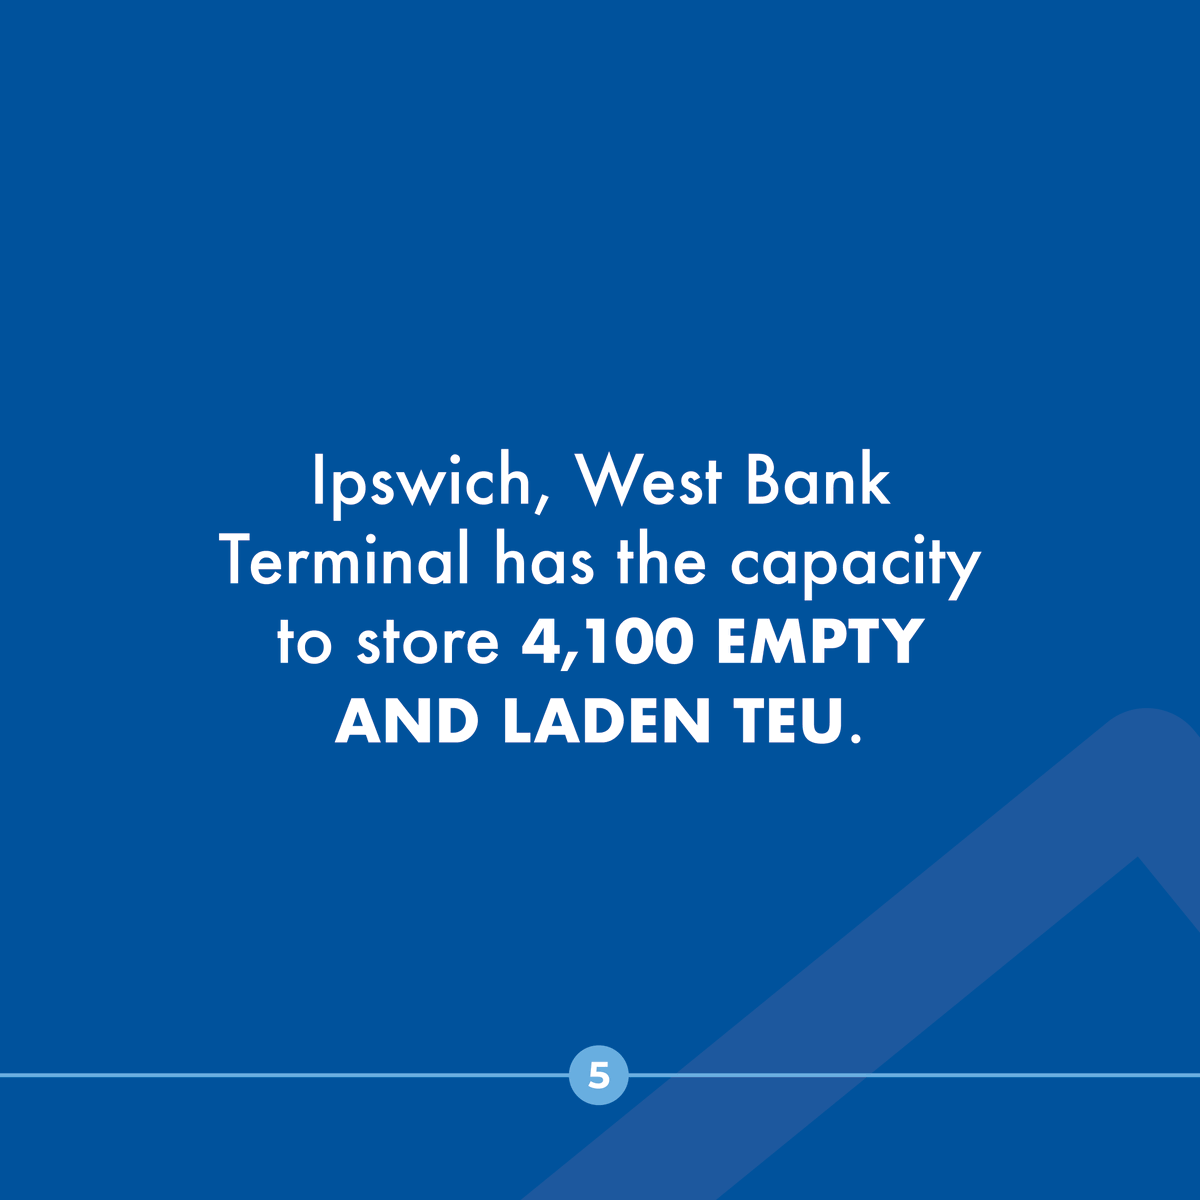 We are heading from the North to the South this week for Ipswich, West Bank Container Terminal! Contact us today if you interested in learning more about our Intermodal services: ow.ly/hW9g50Qo3Uq #RailTerminal #MaritimeTransport #Ipswich